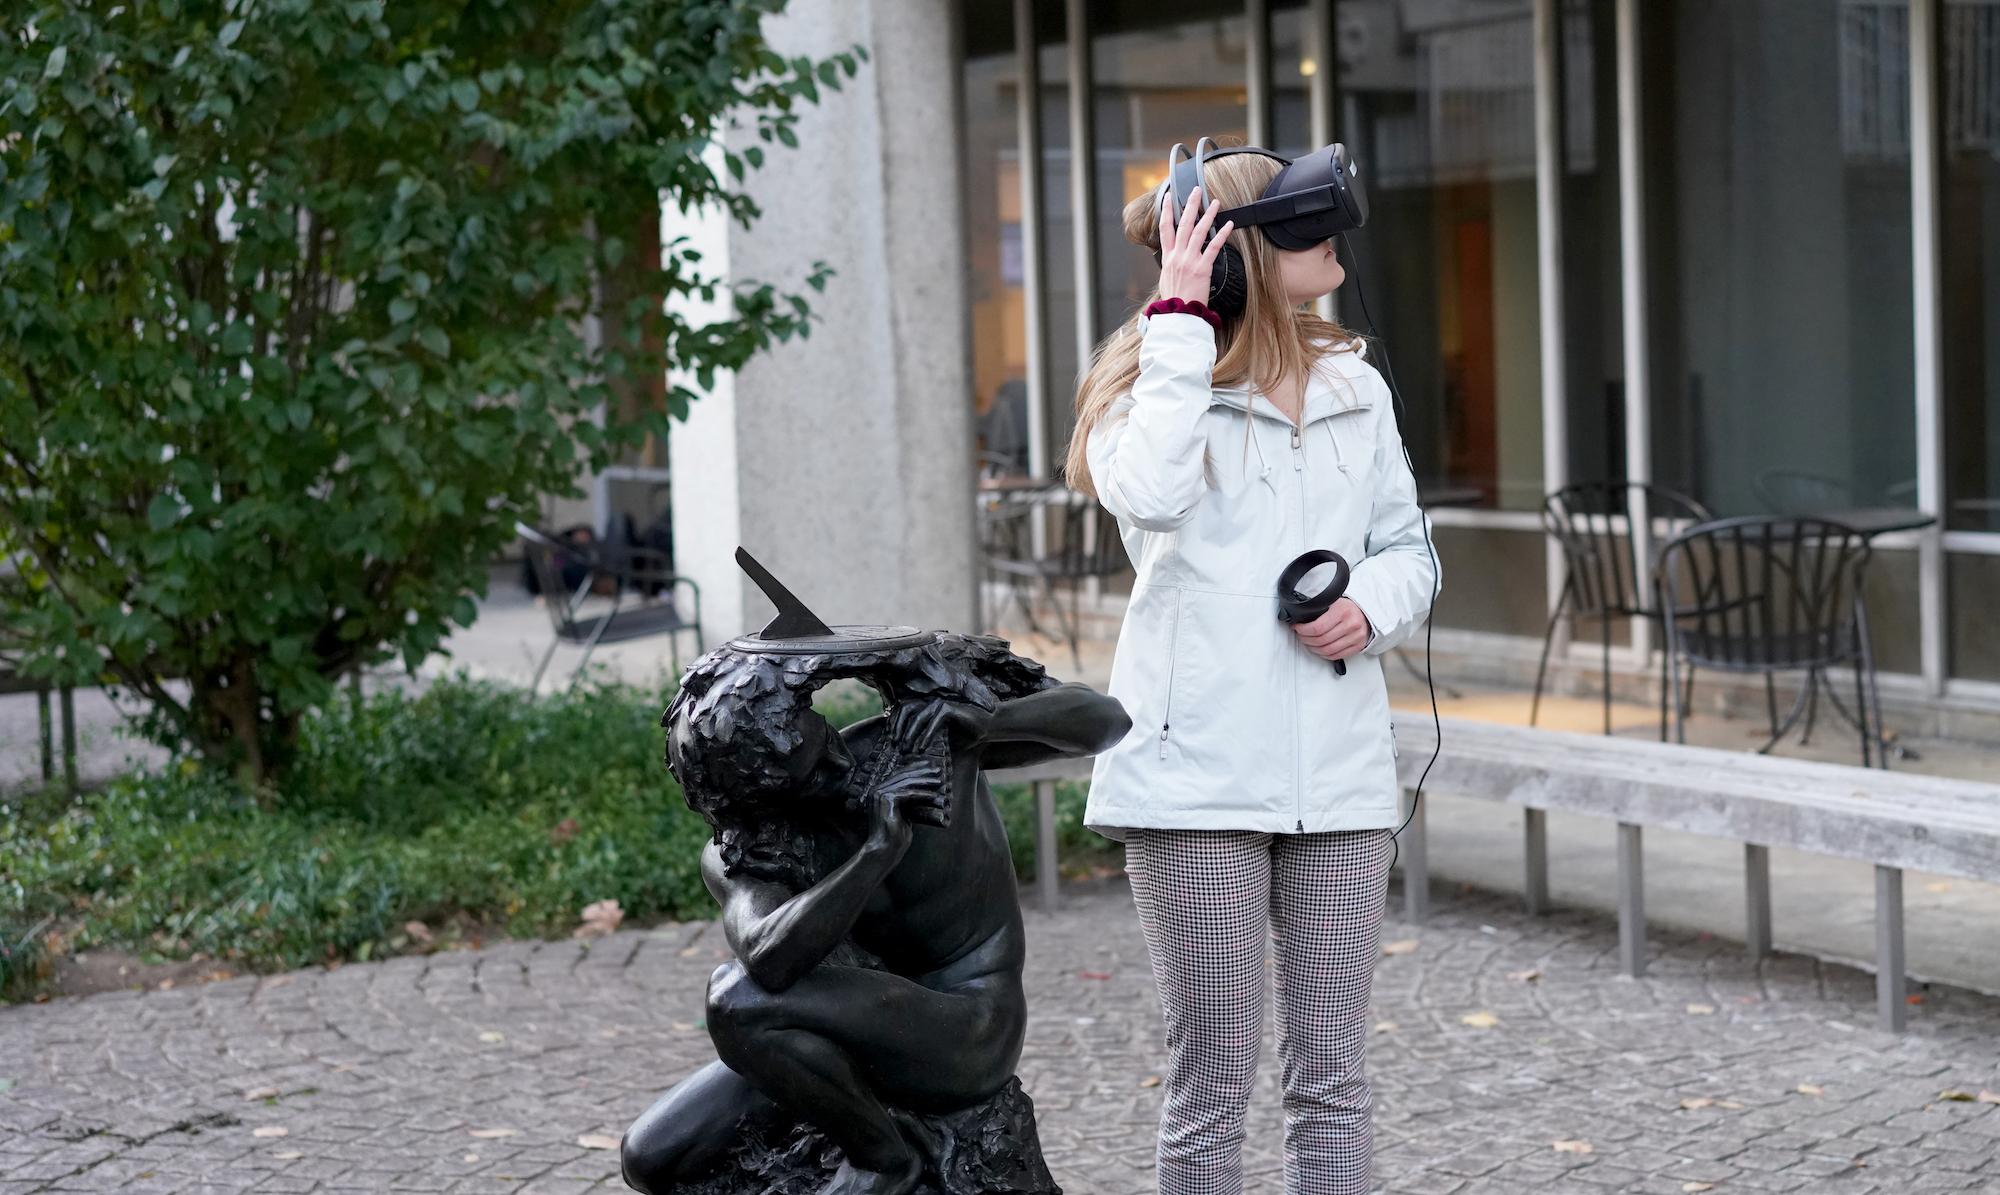 Person wearing a virtual reality headset looks to the side, standing next to a statue facing the same direction